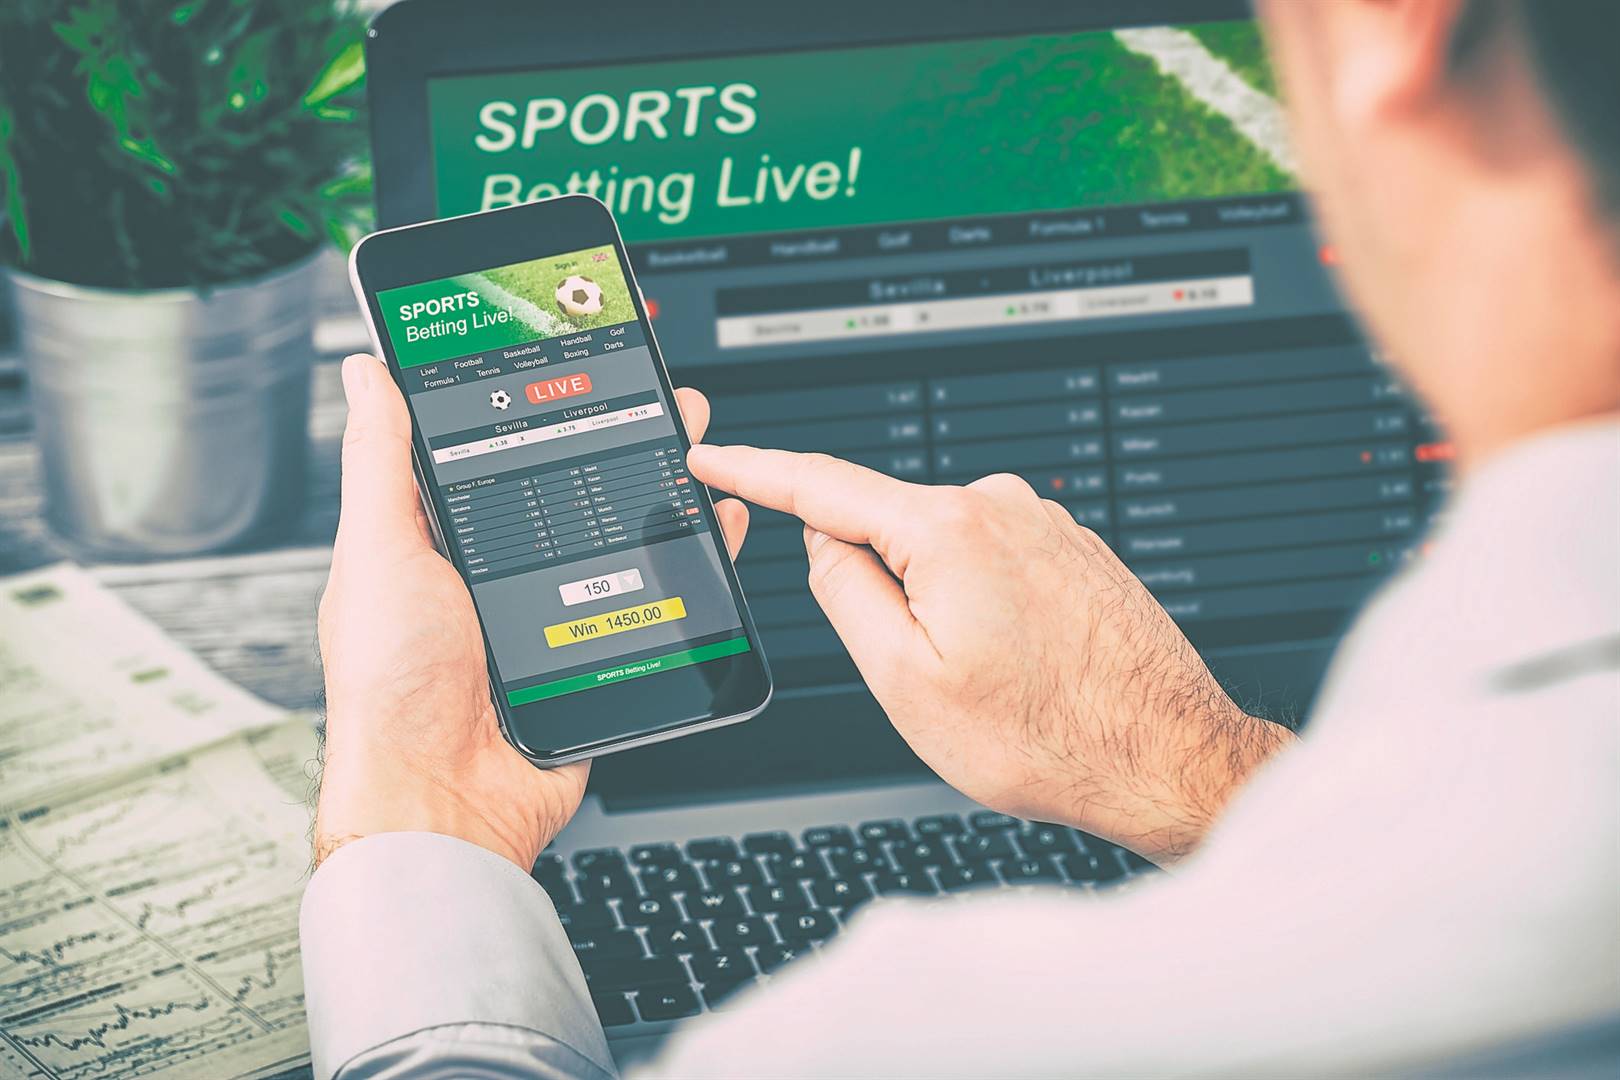 Online gambling is not permitted or regulated in South Africa.